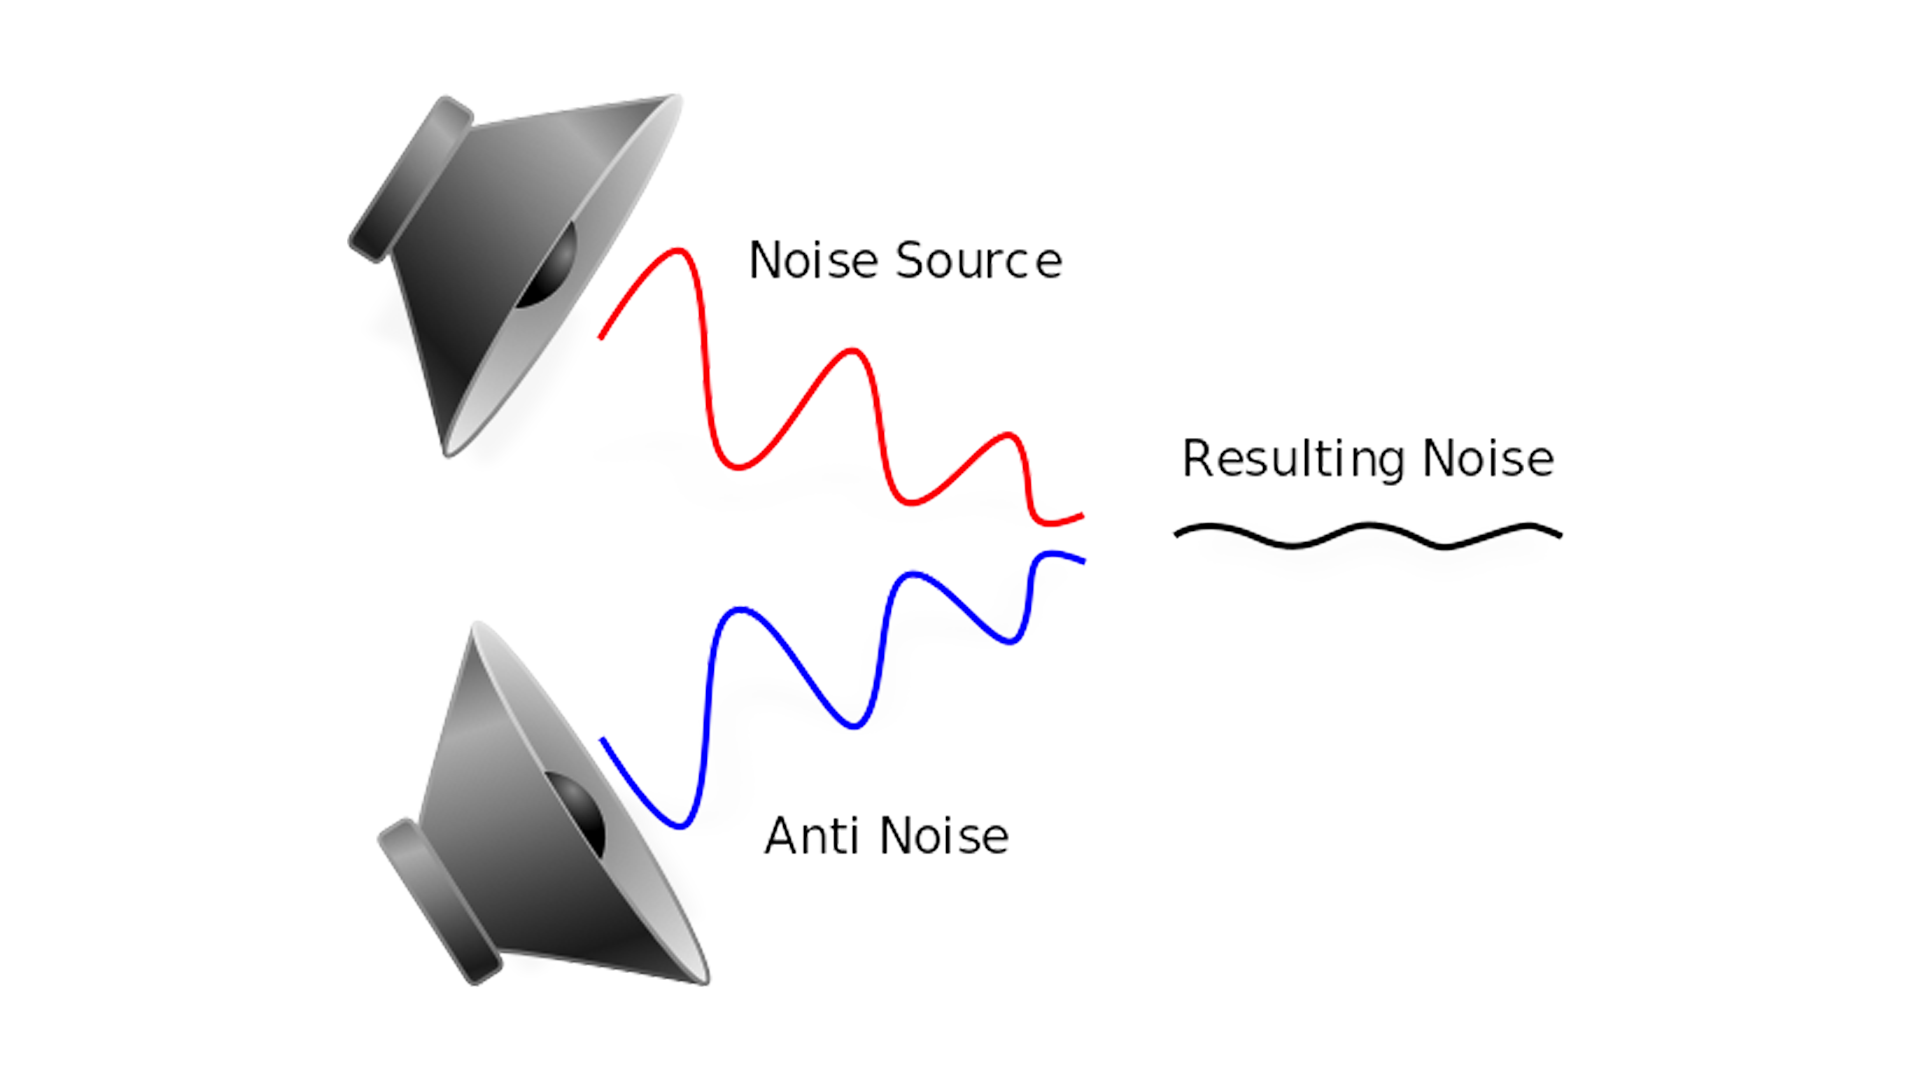 An illustration that shows two inverse sound waves colliding, effectively canceling both sounds.